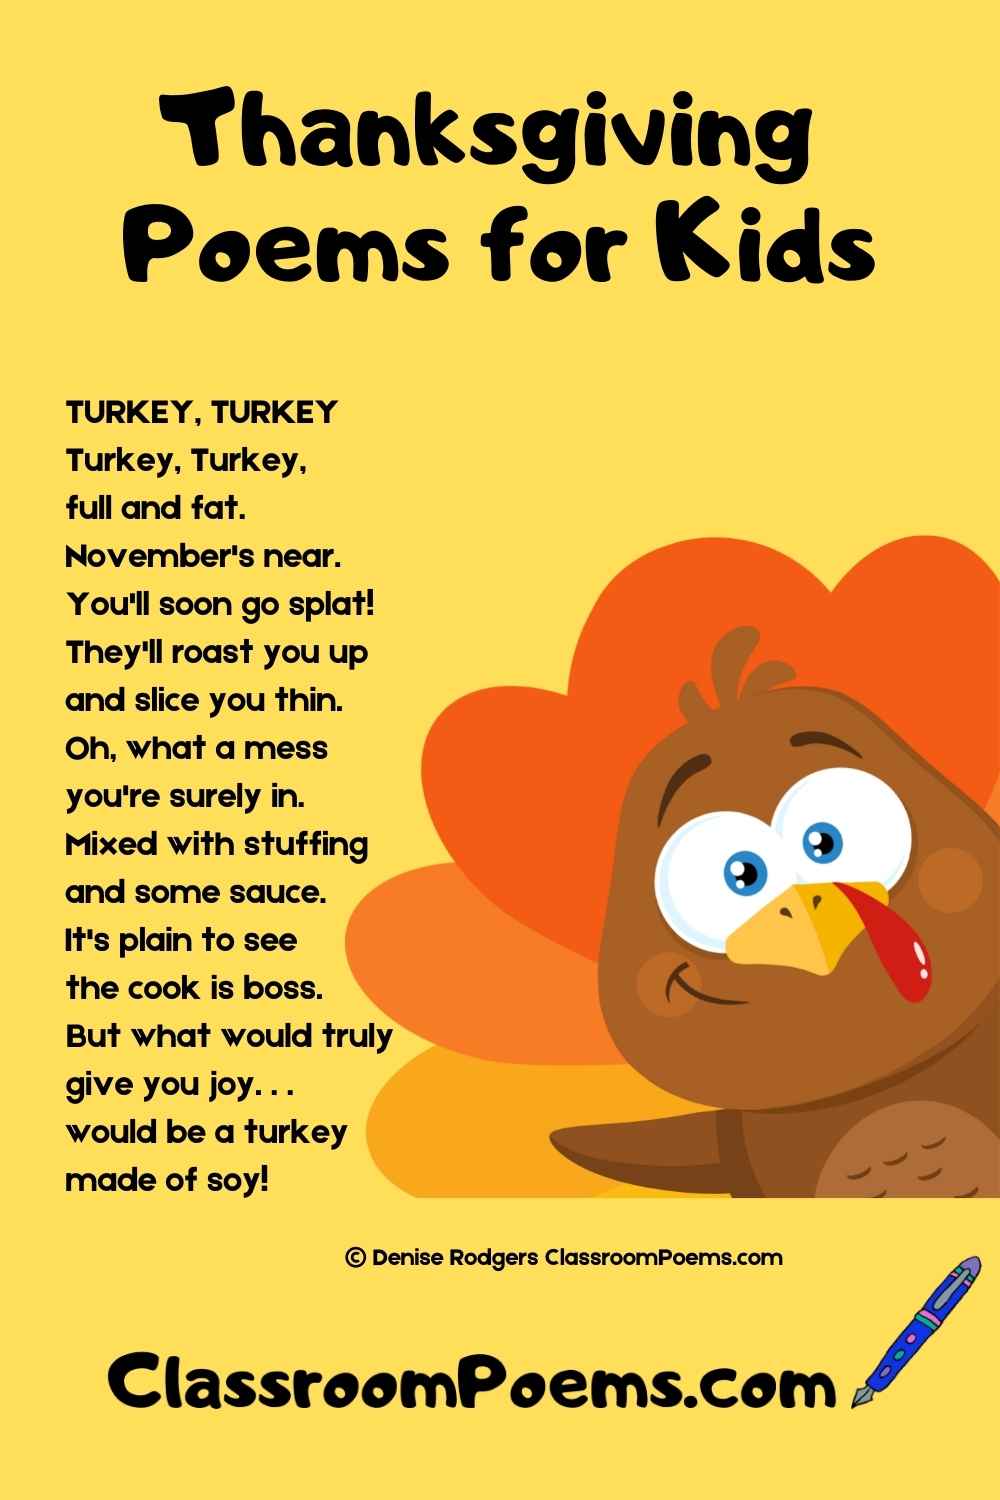 Funny Thanksgiving poem by Denise Rodgers on ClassroomPoems.com.